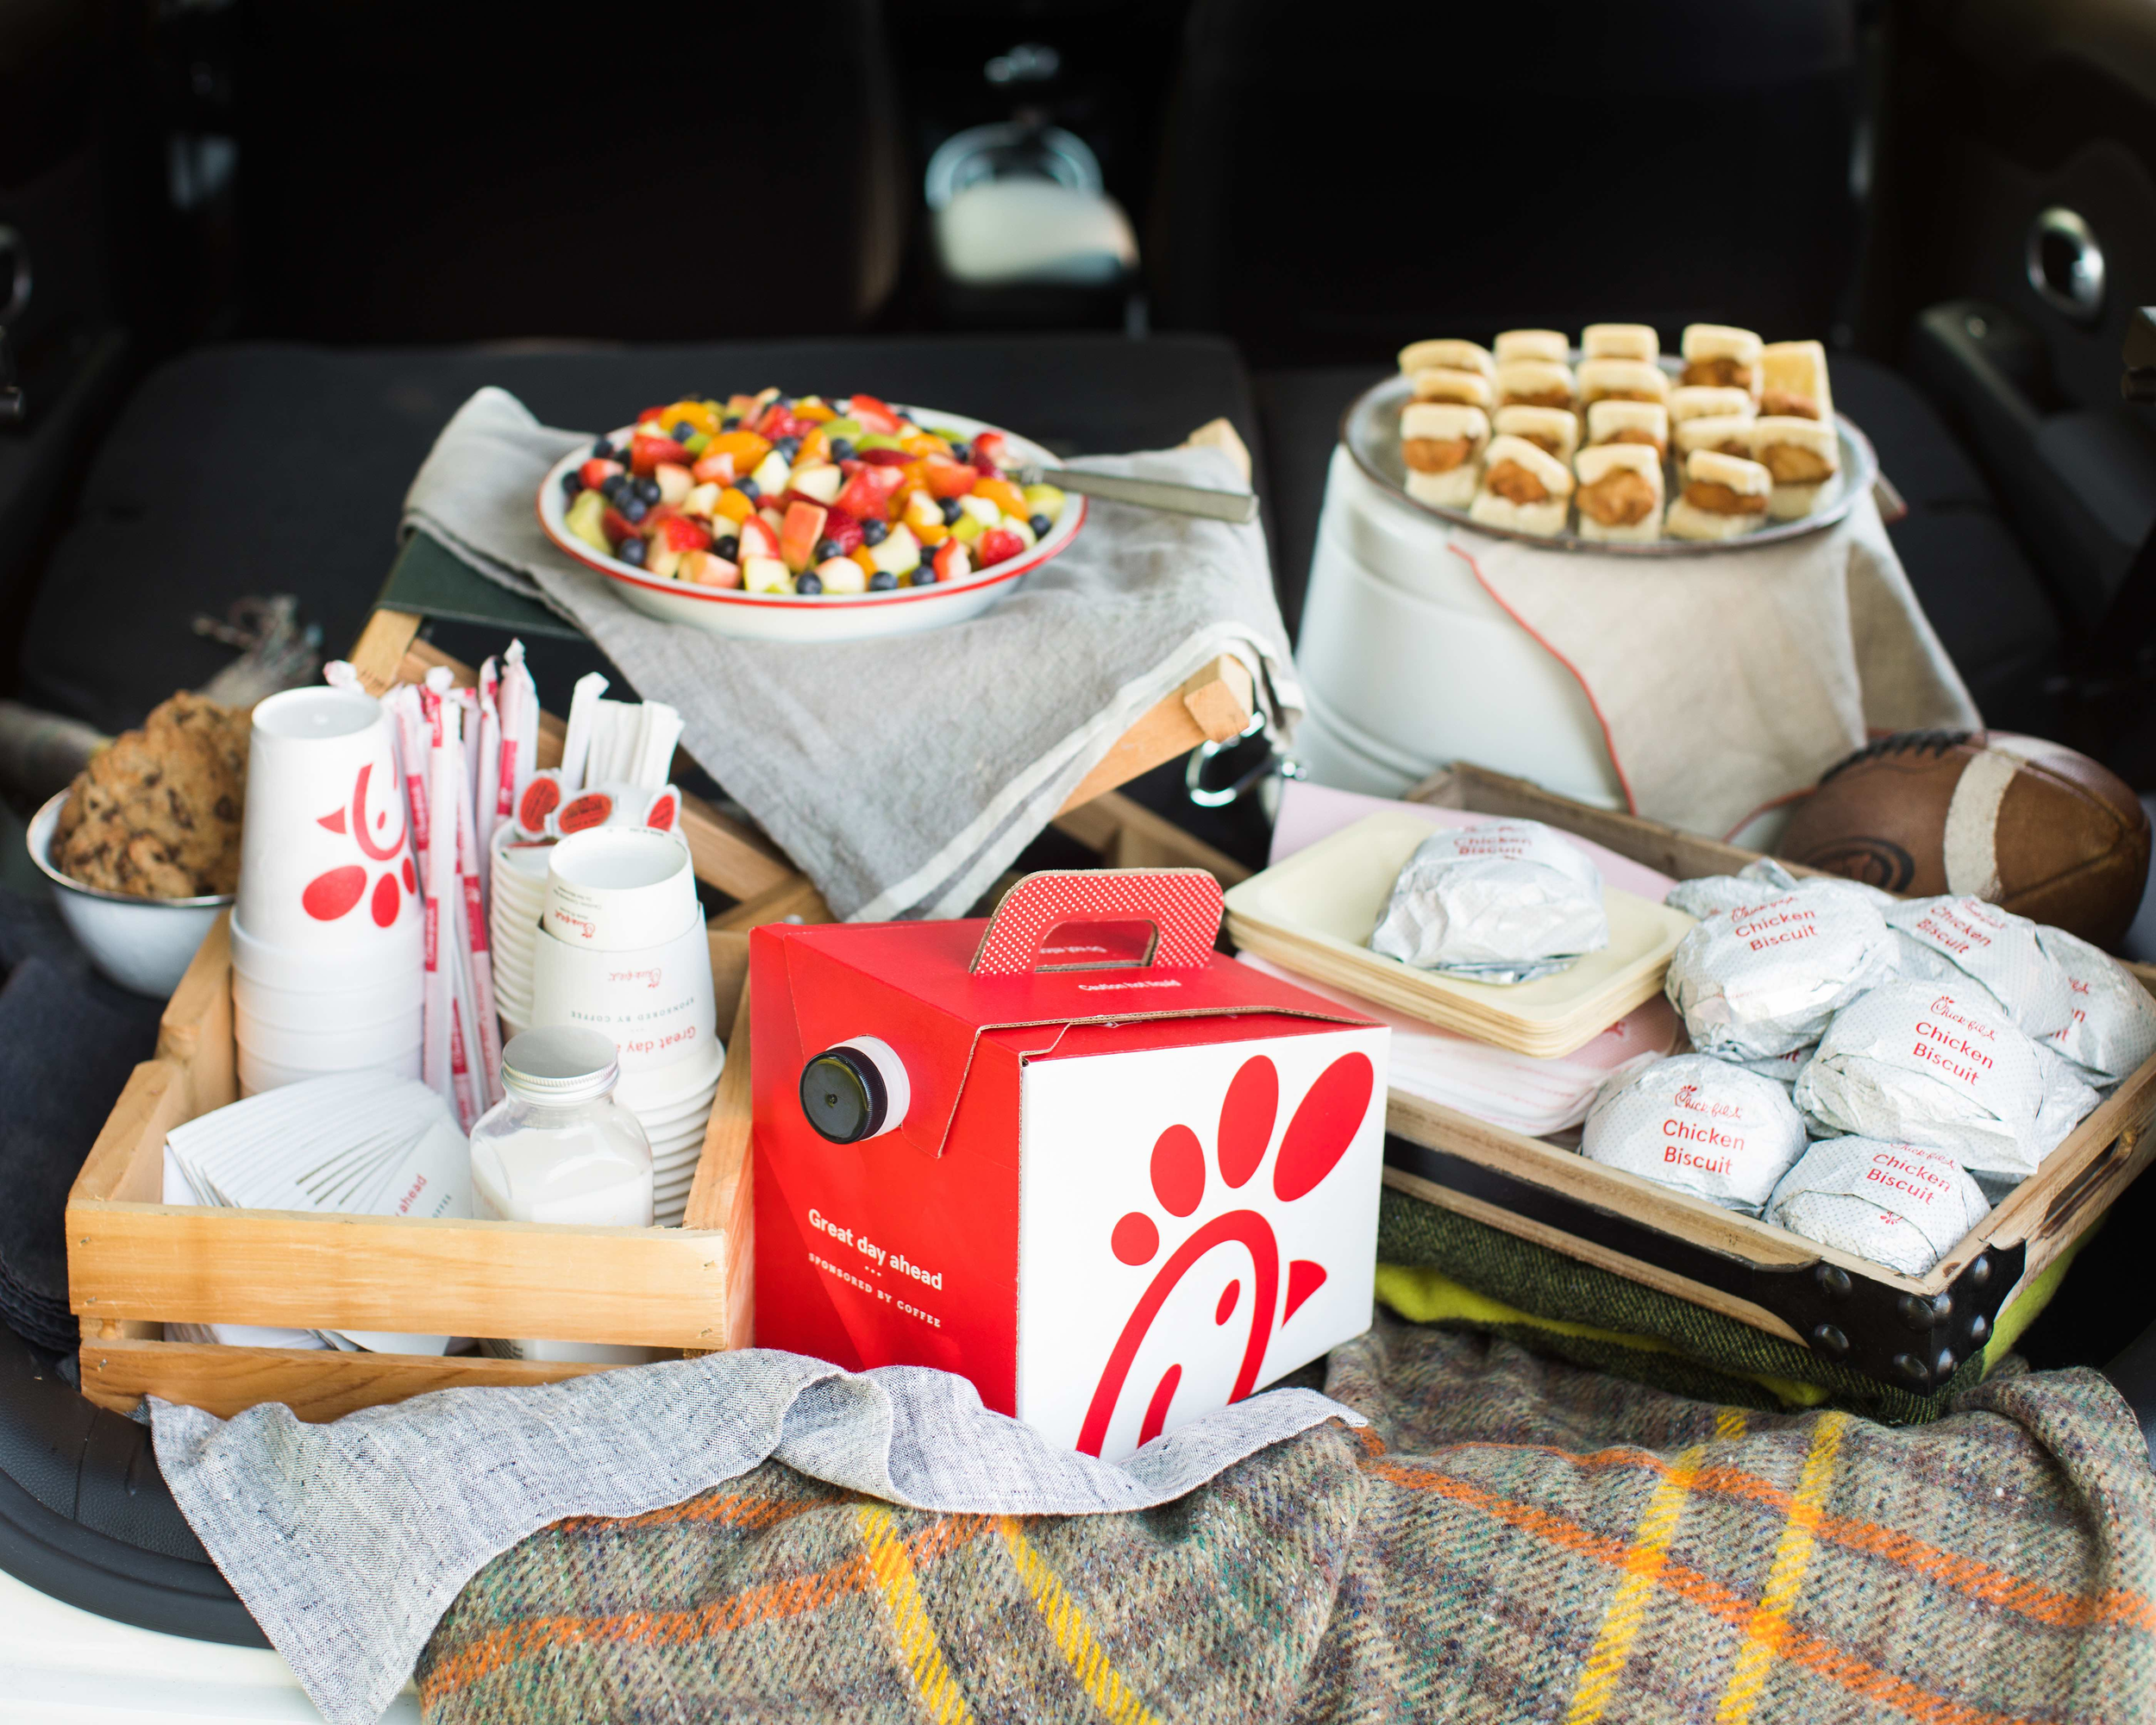 Chick-fil-A catering with chicken minis, fruit, chicken biscuits and coffee